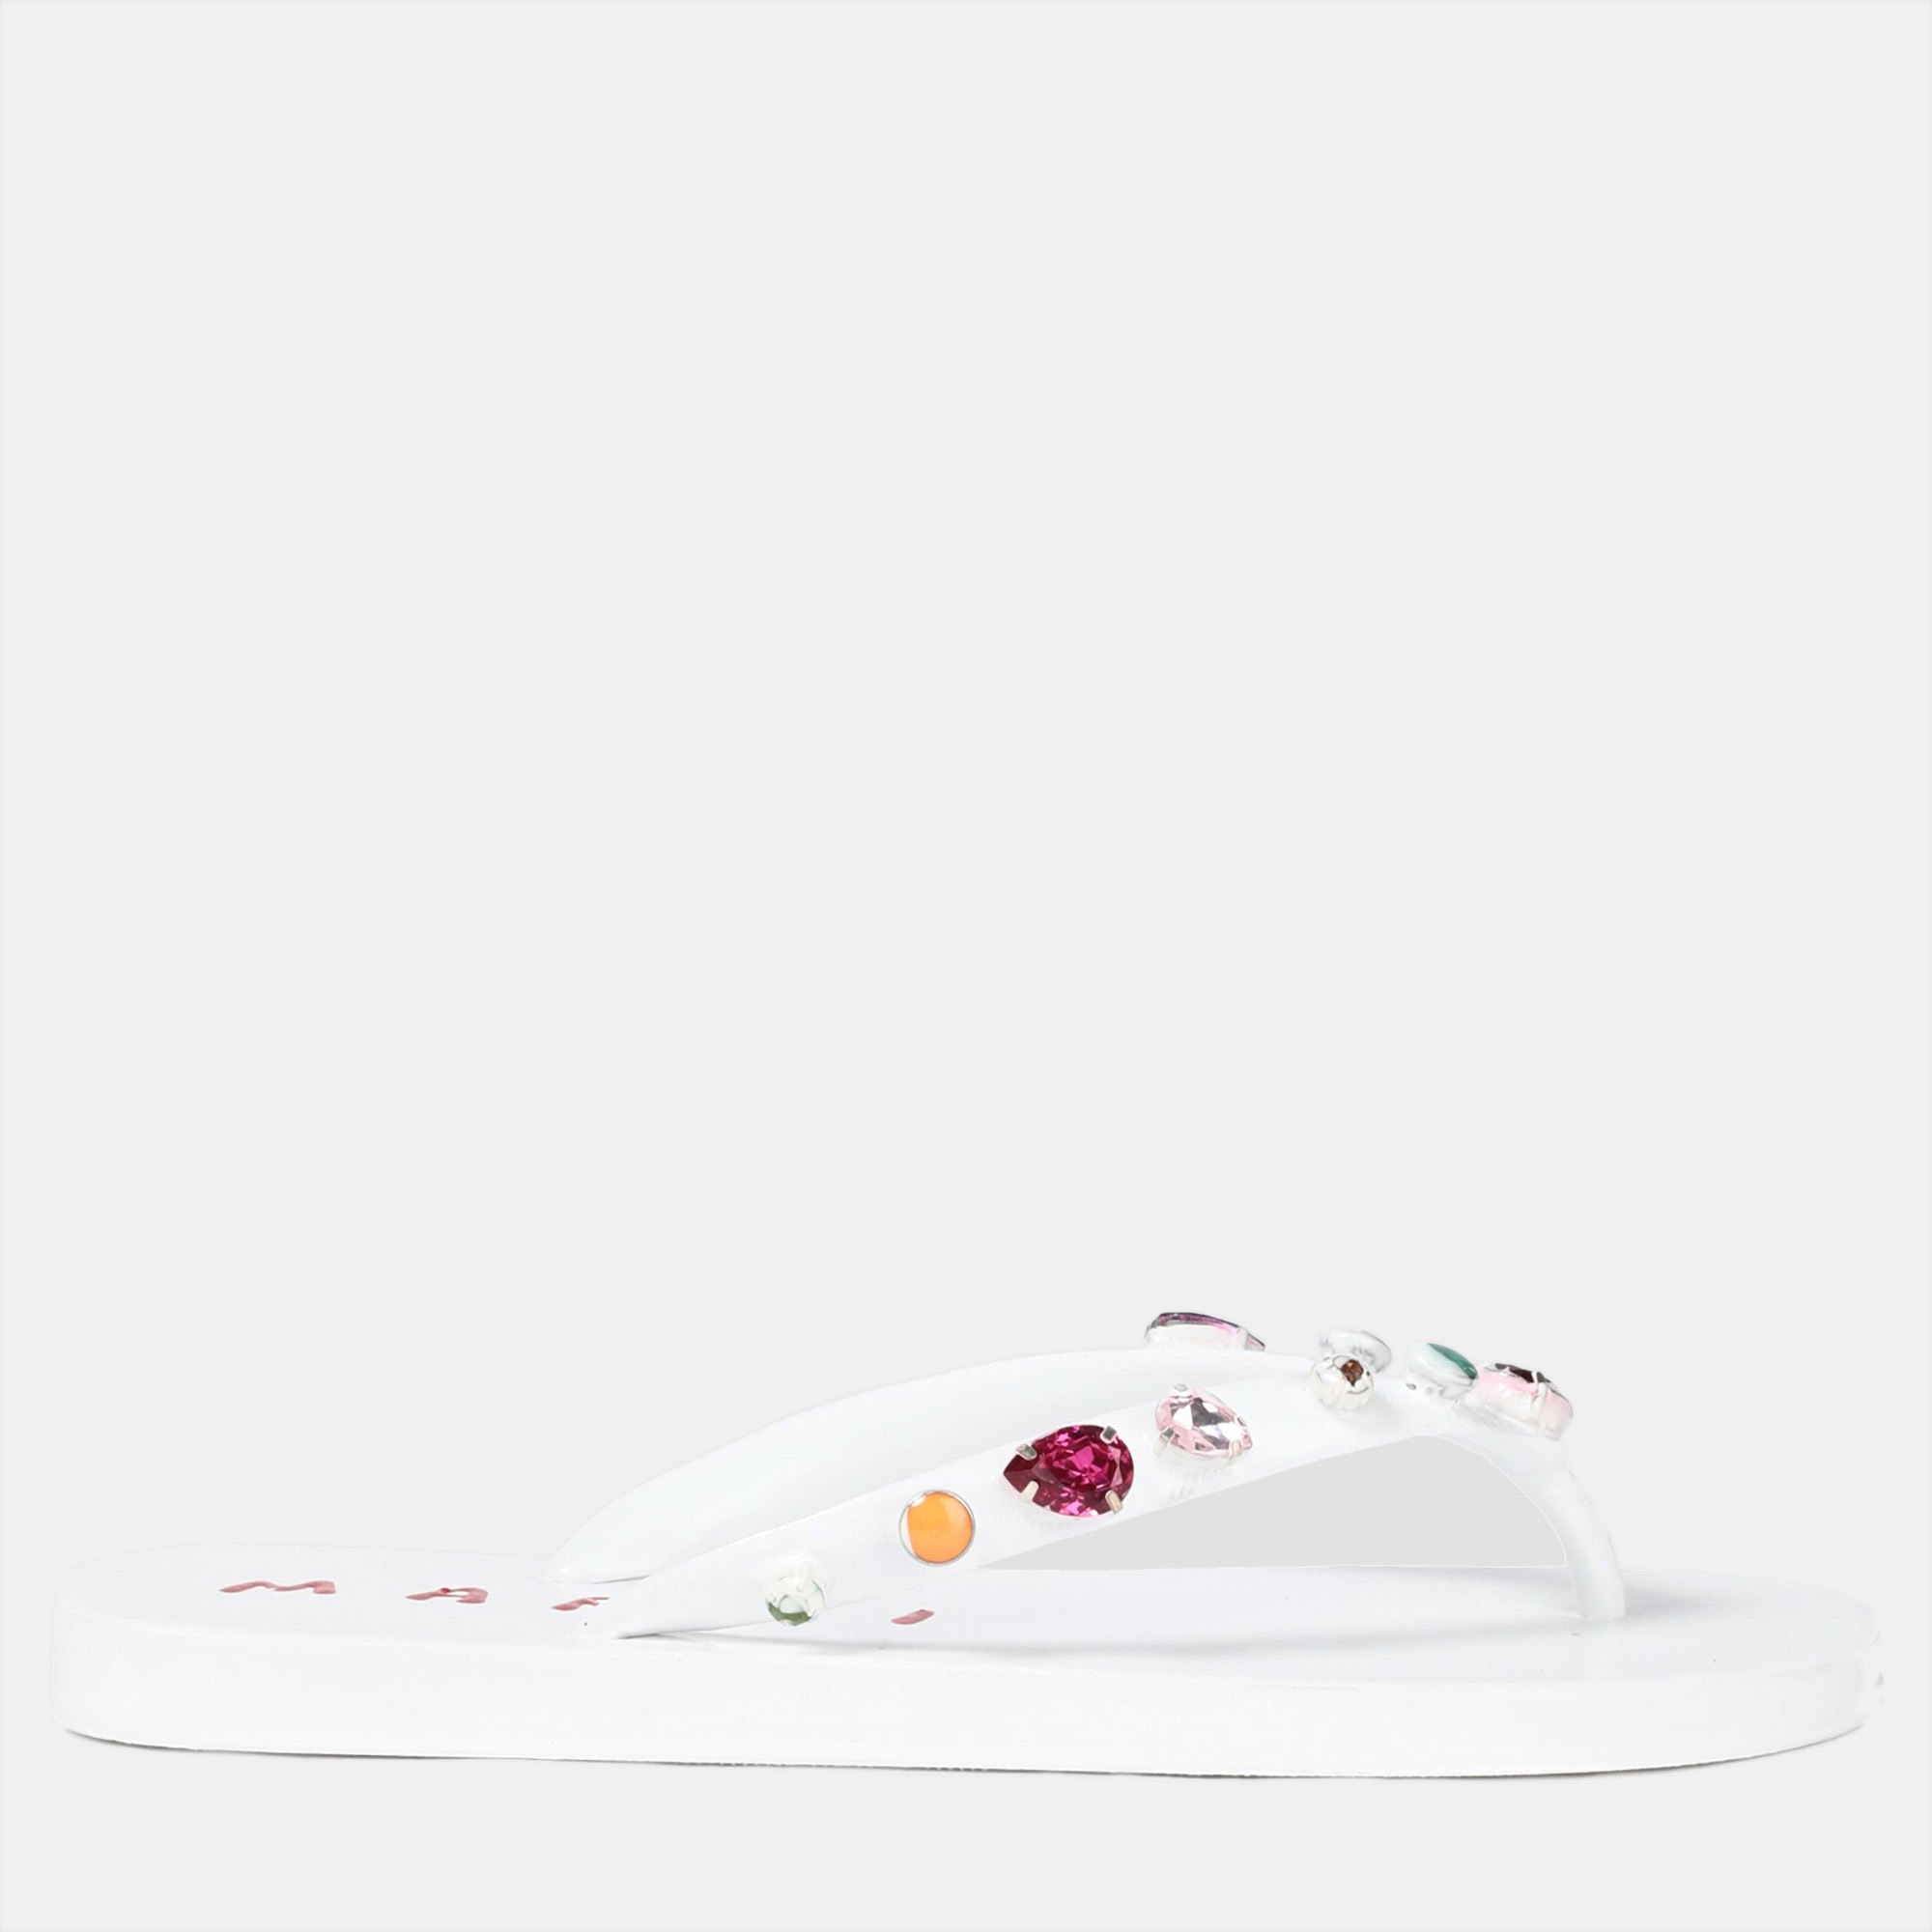 Marni rubber thong sandals 34